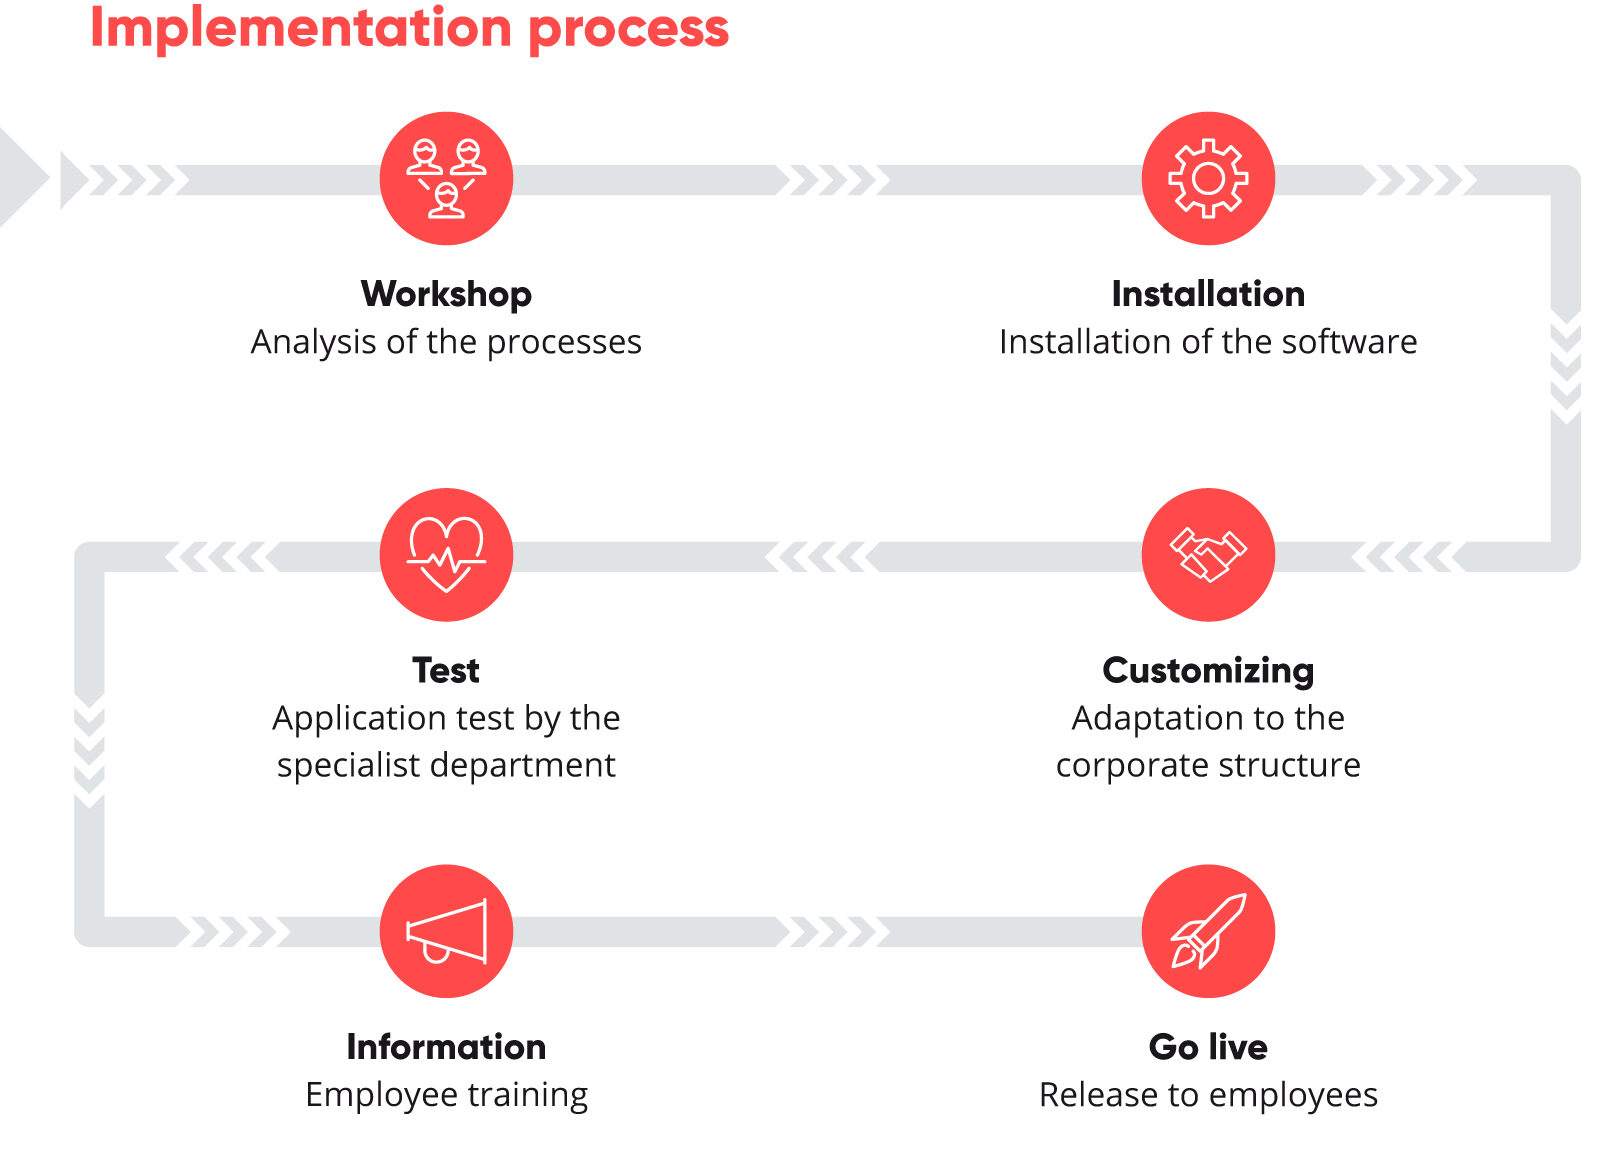 valantic graphic about the HCM Inside implementation process